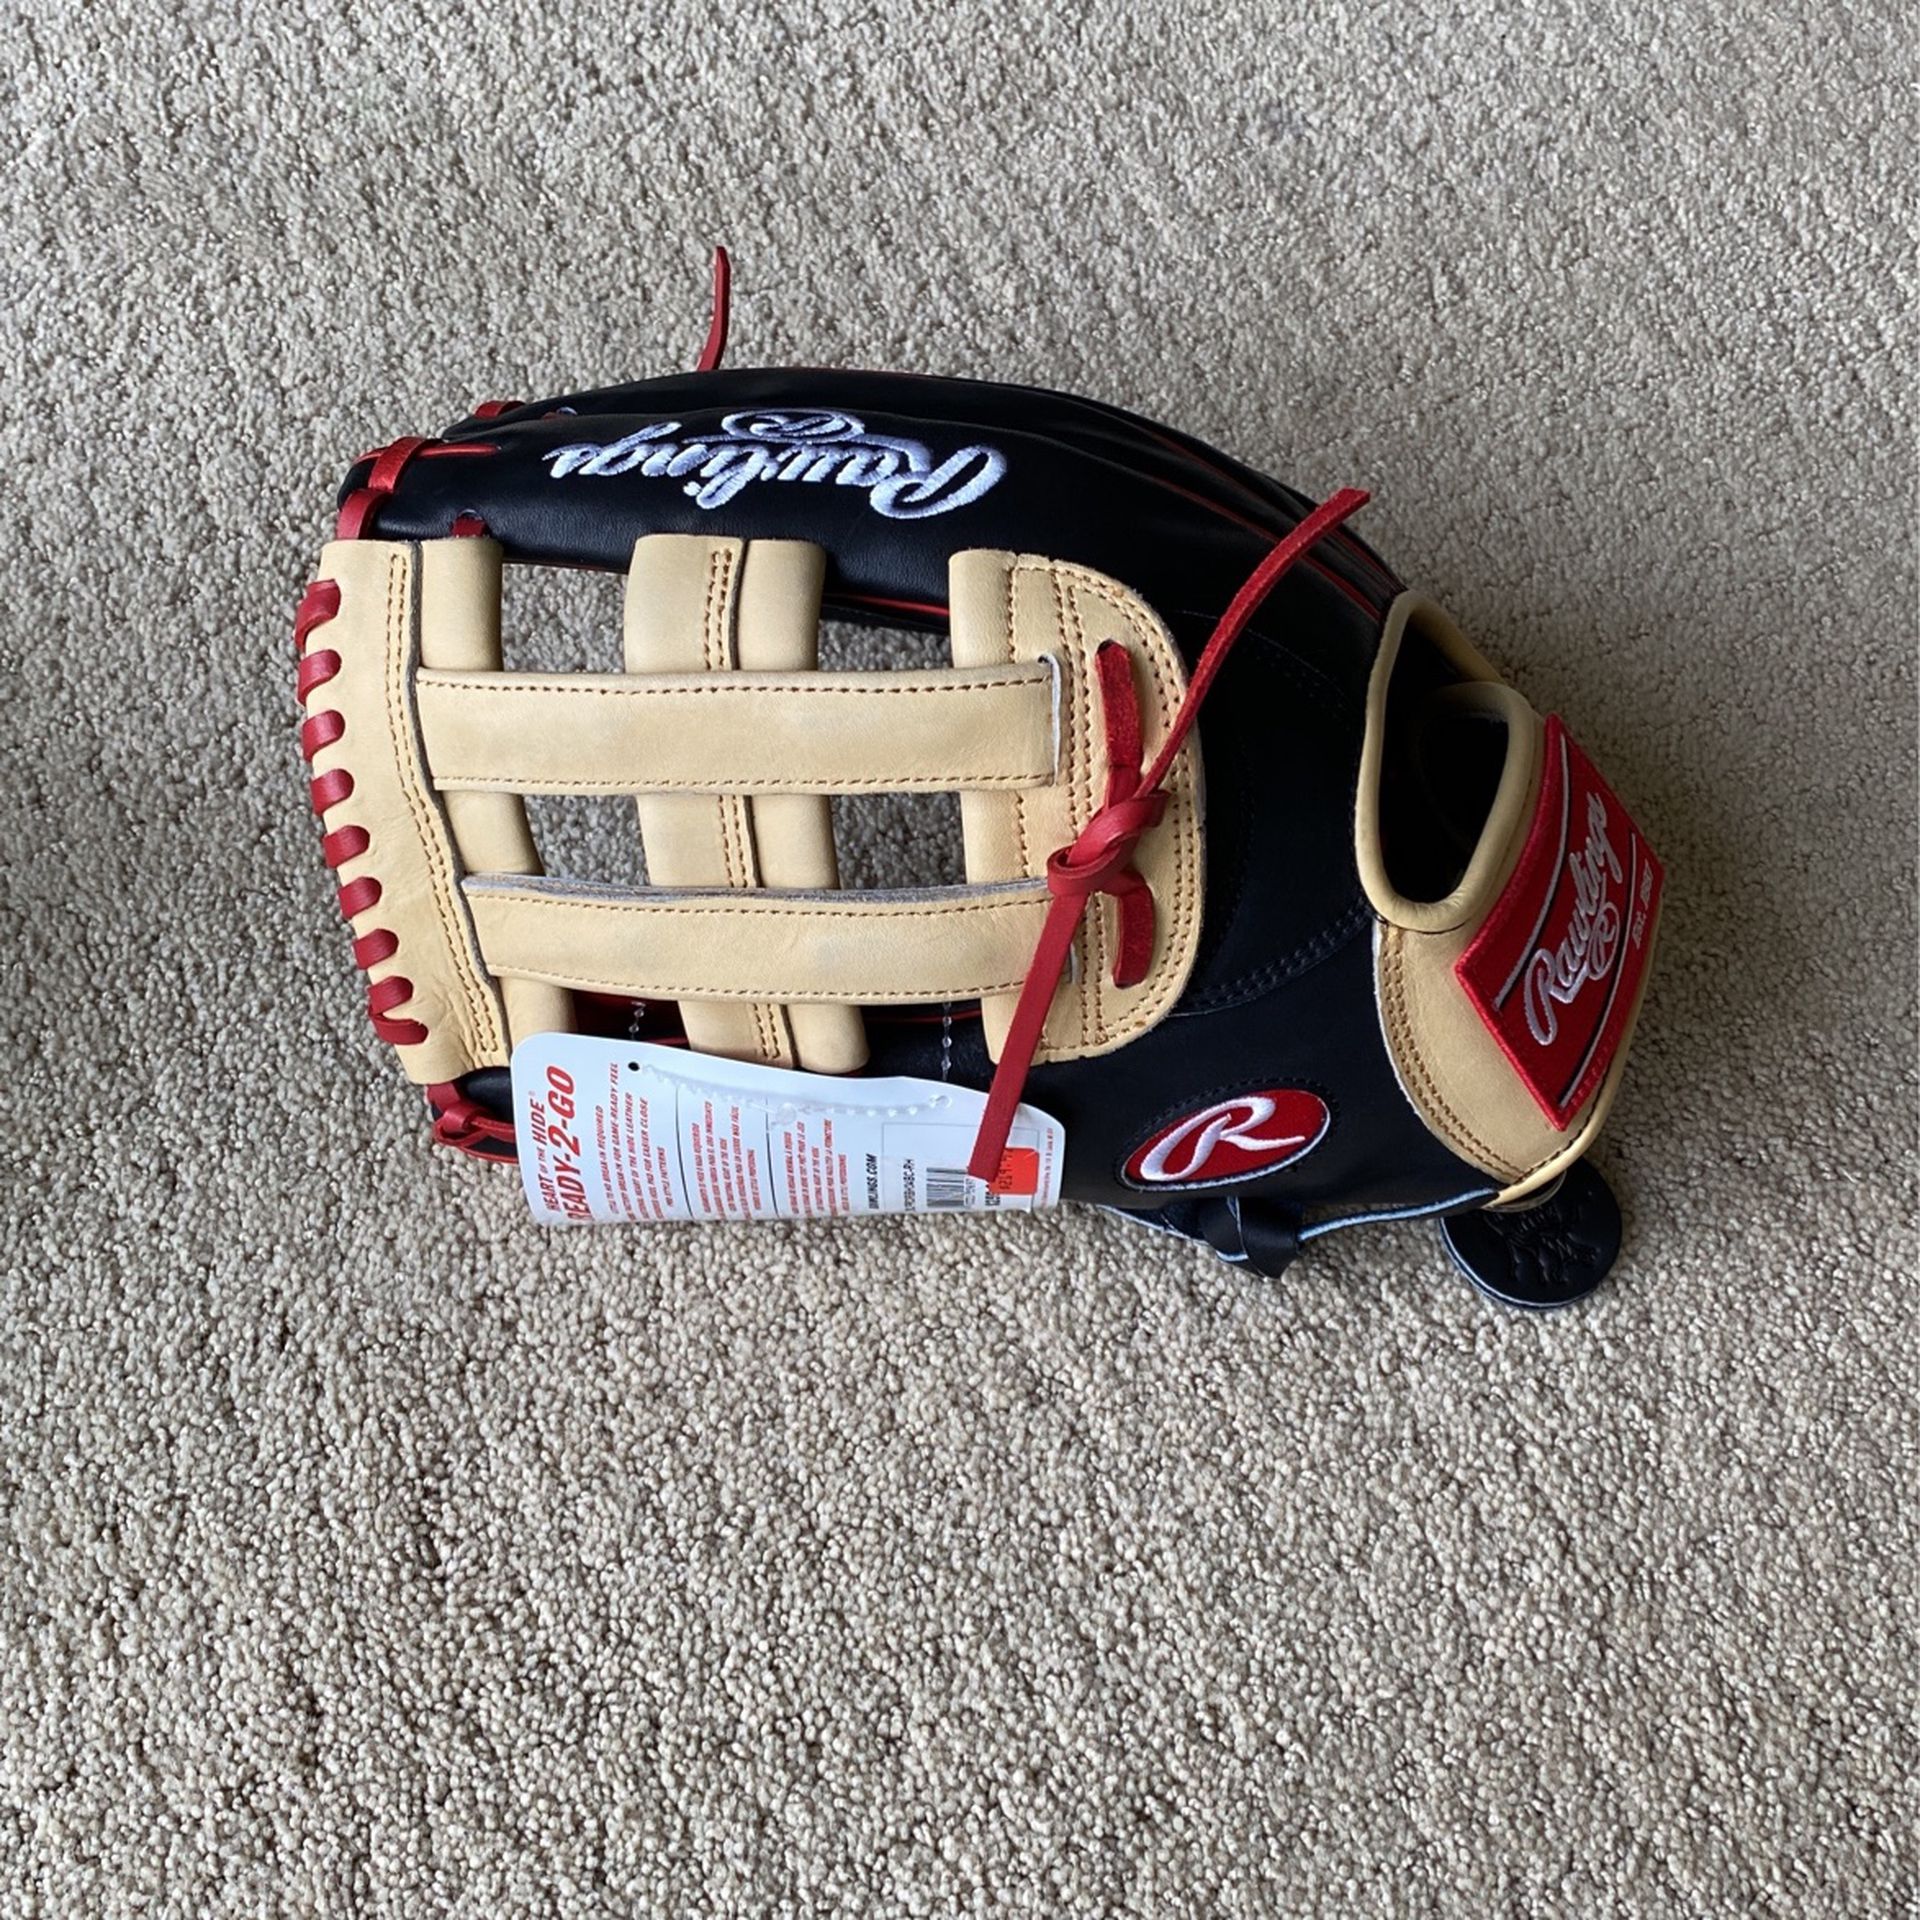 Rawlings Baseball Left Handed Glove PRORBH34BC